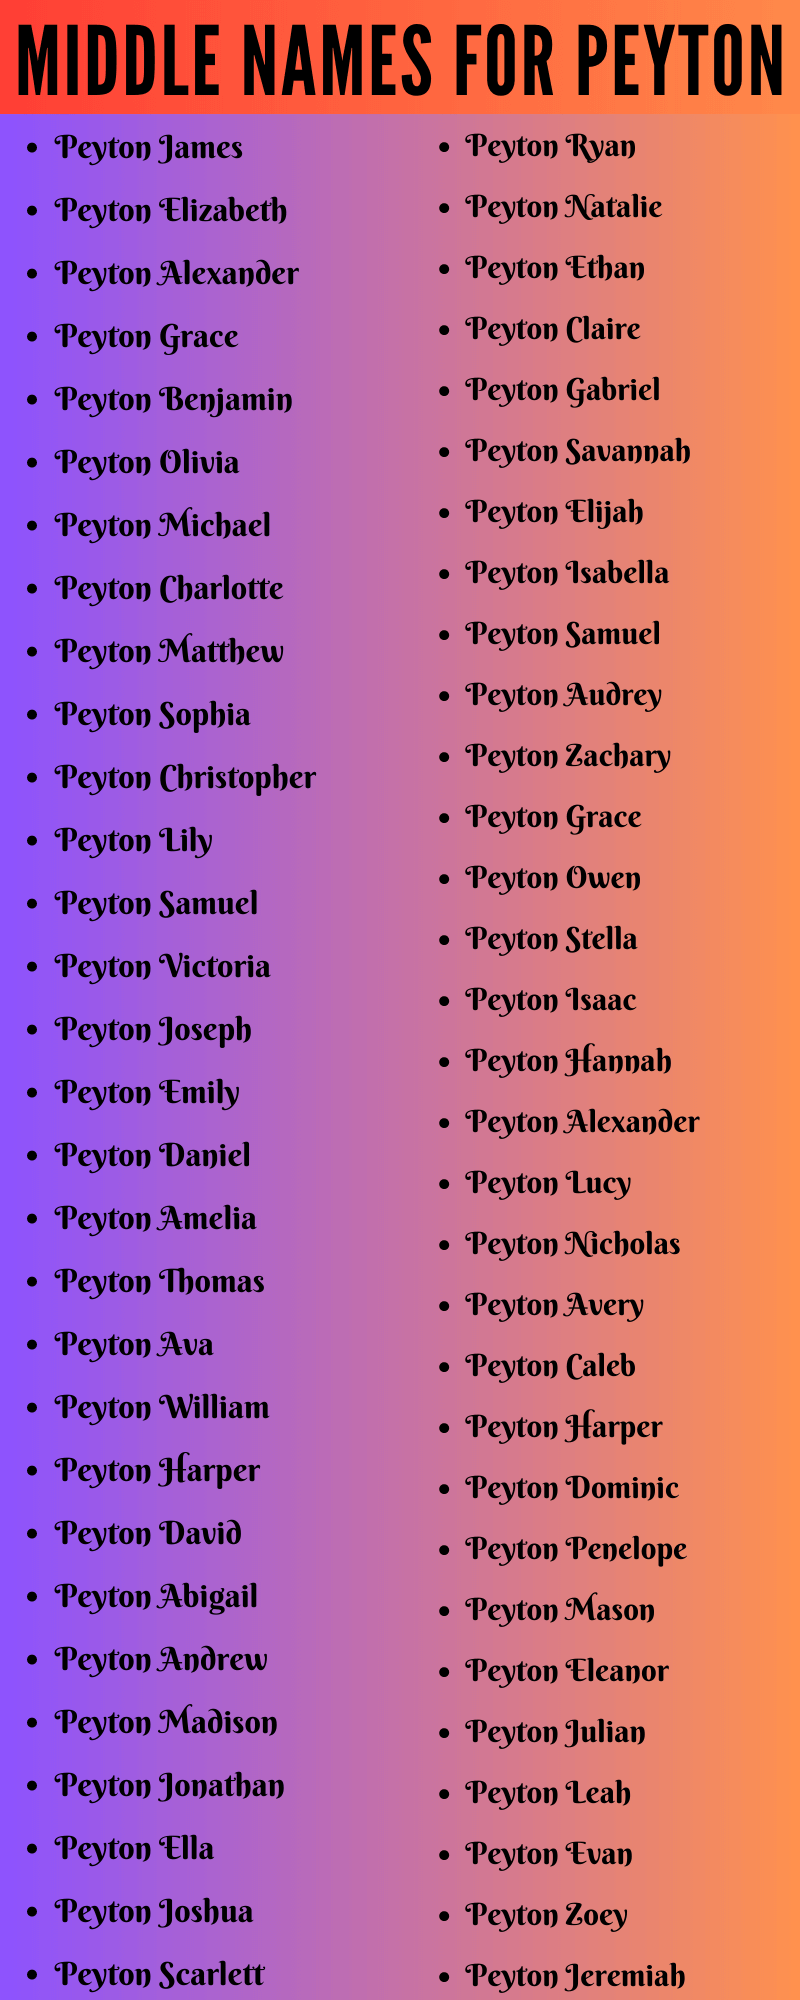 400 Creative Middle Names For Peyton